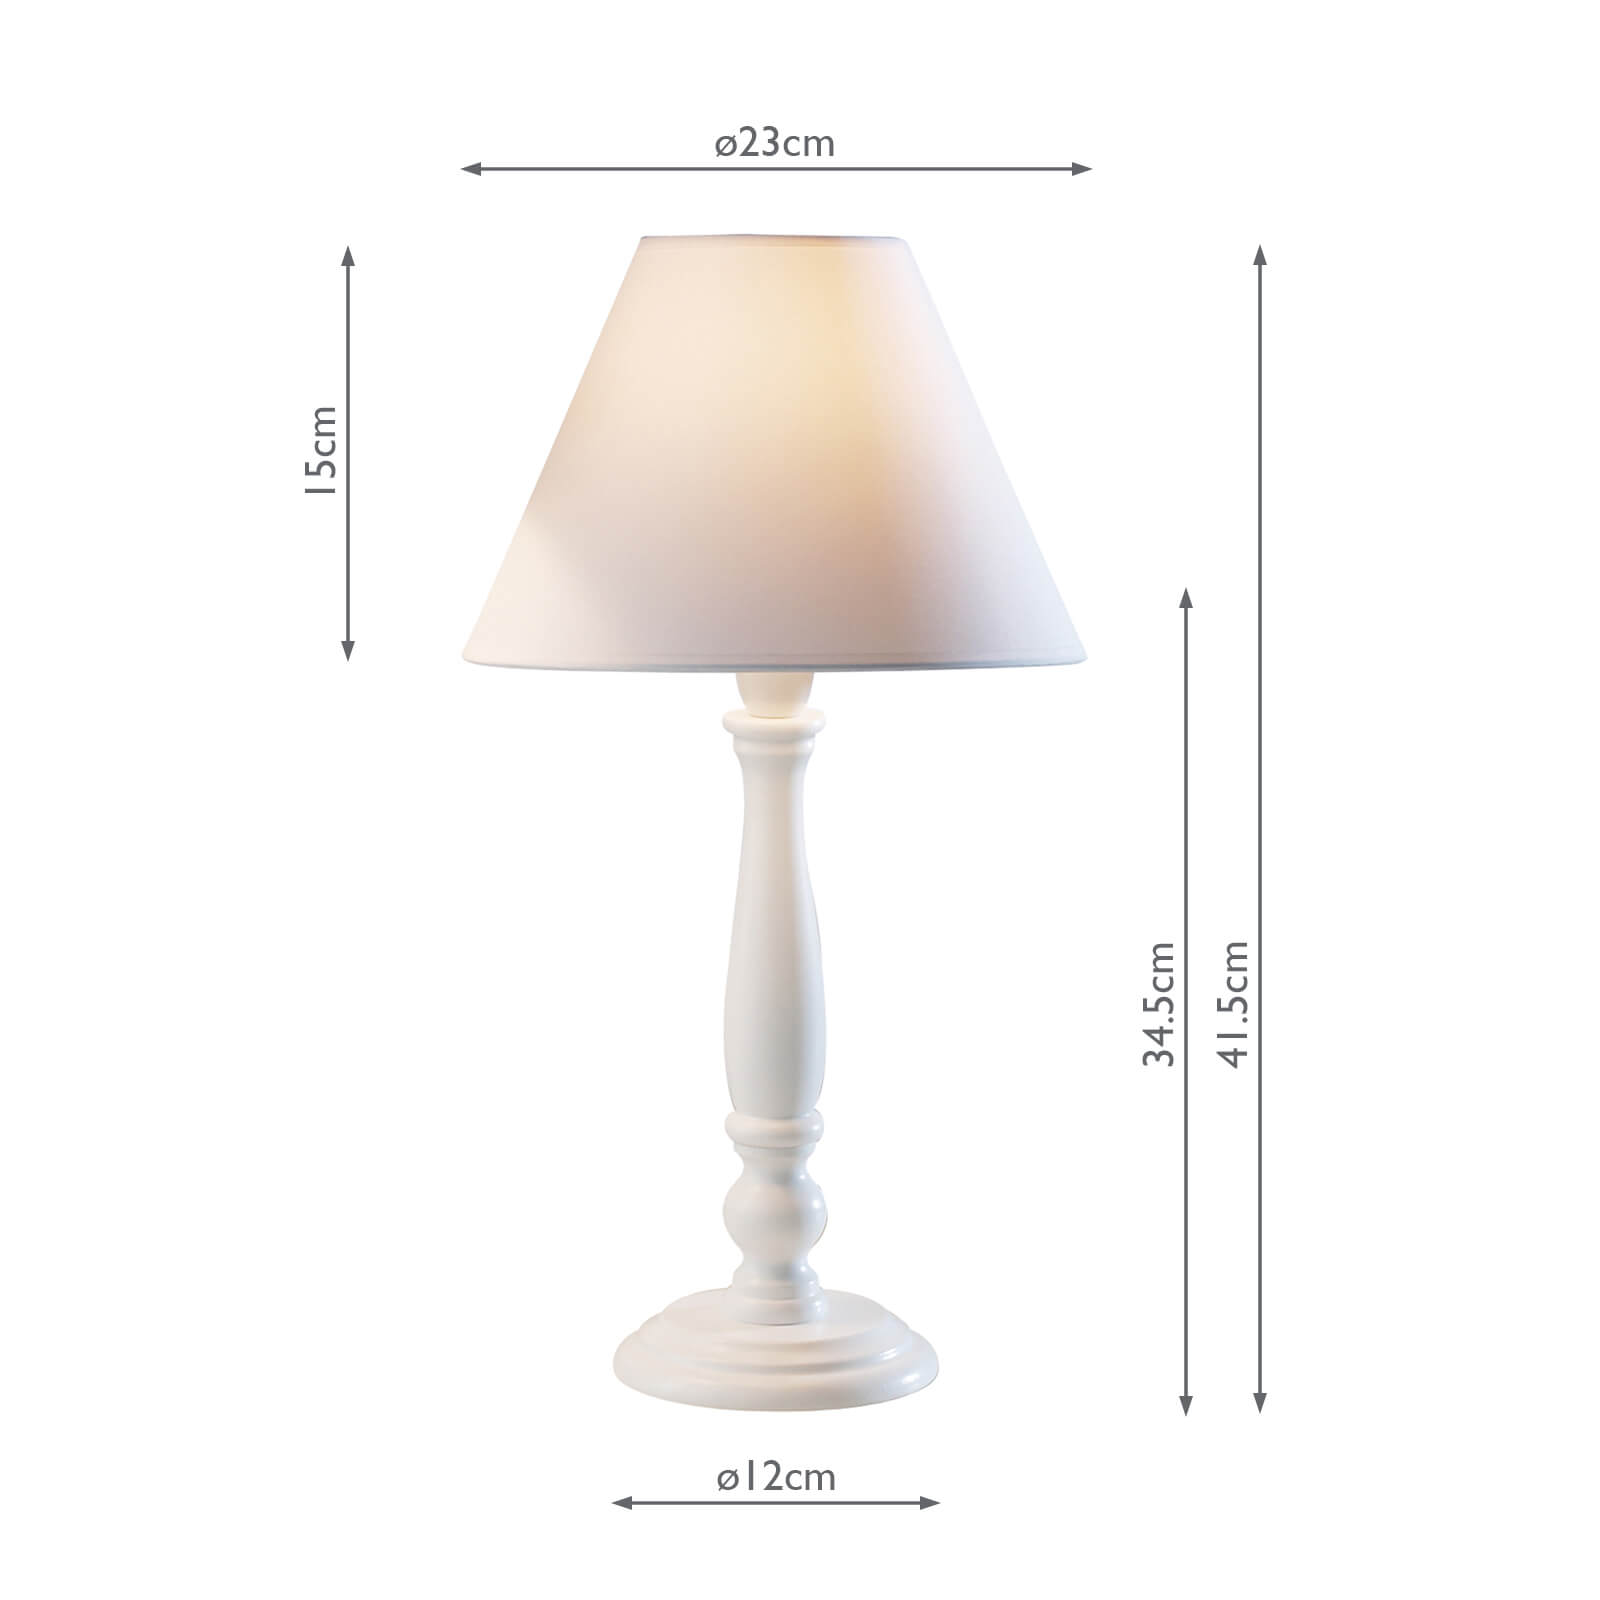 Regal Table Lamp 10 Inch White Complete, Small Table Lamp With Square Shade